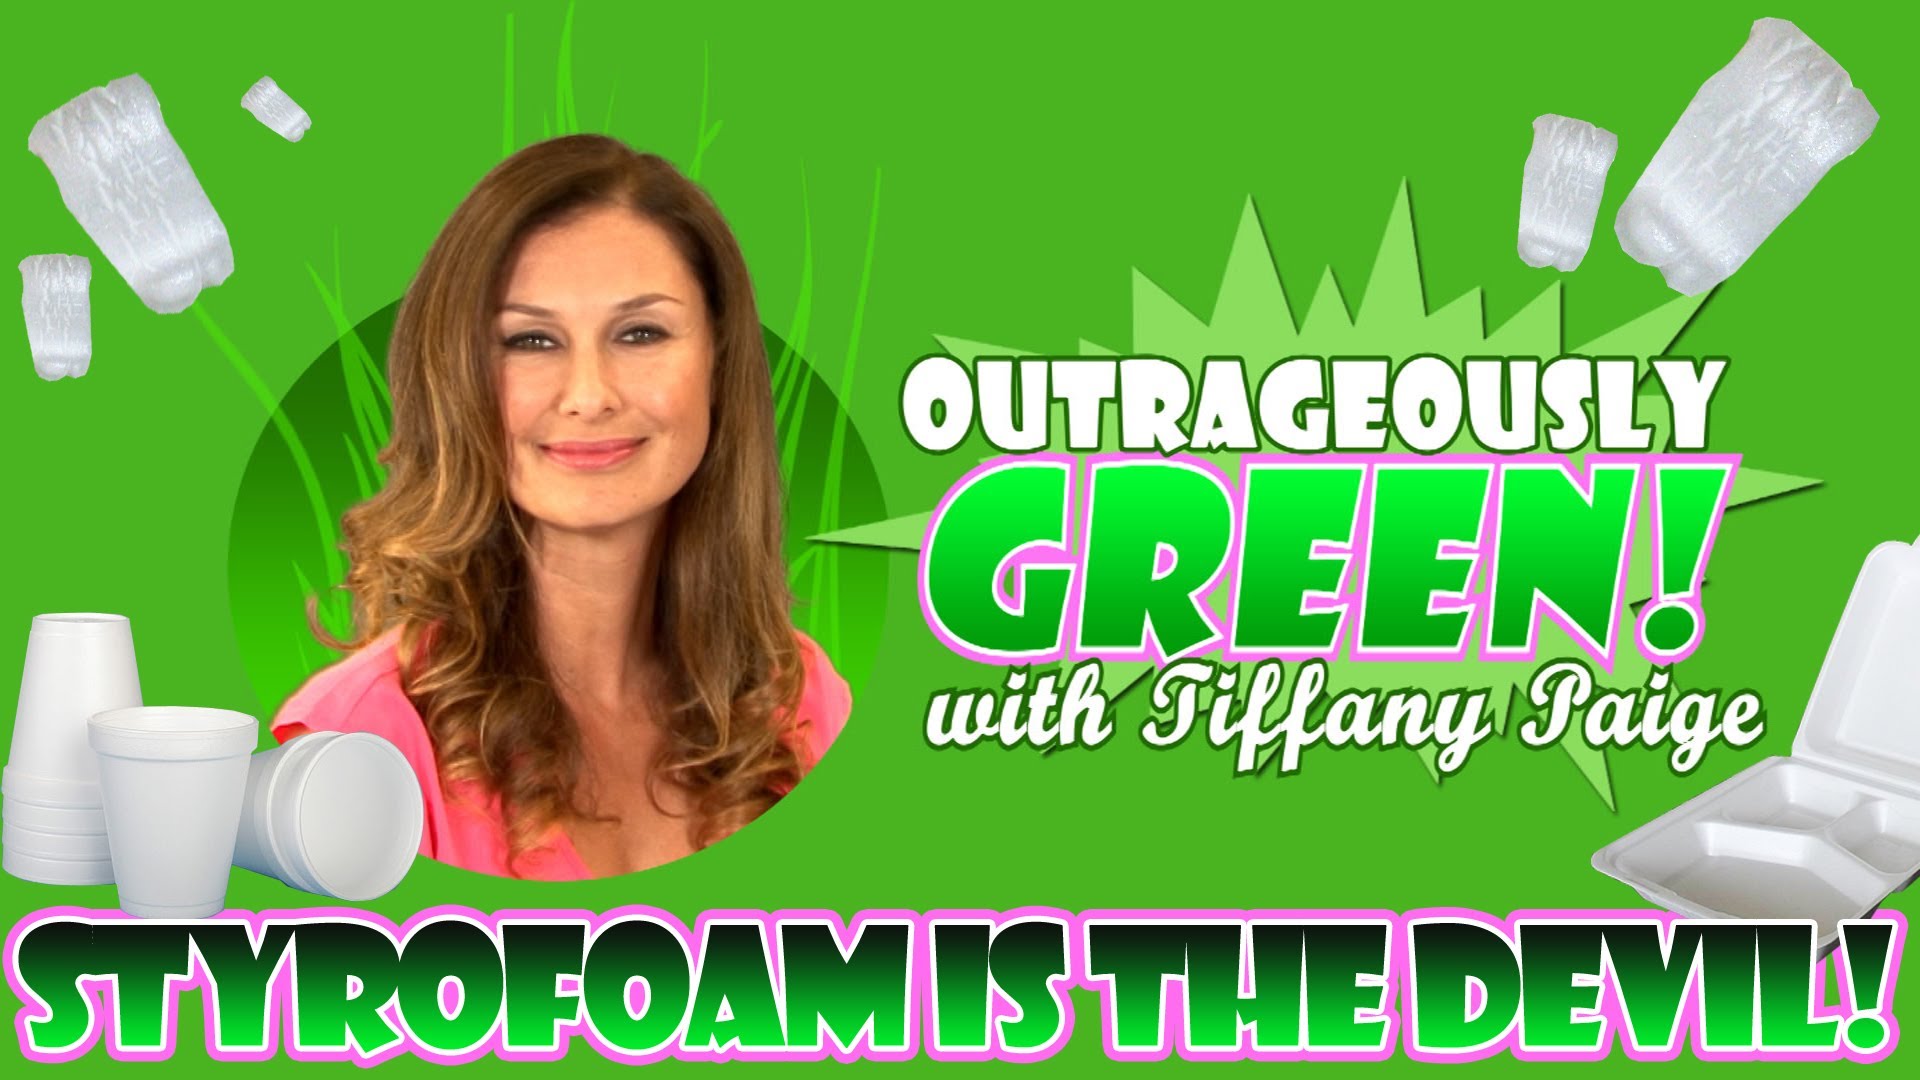 Outrageously Green - Styrofoam is the Devil